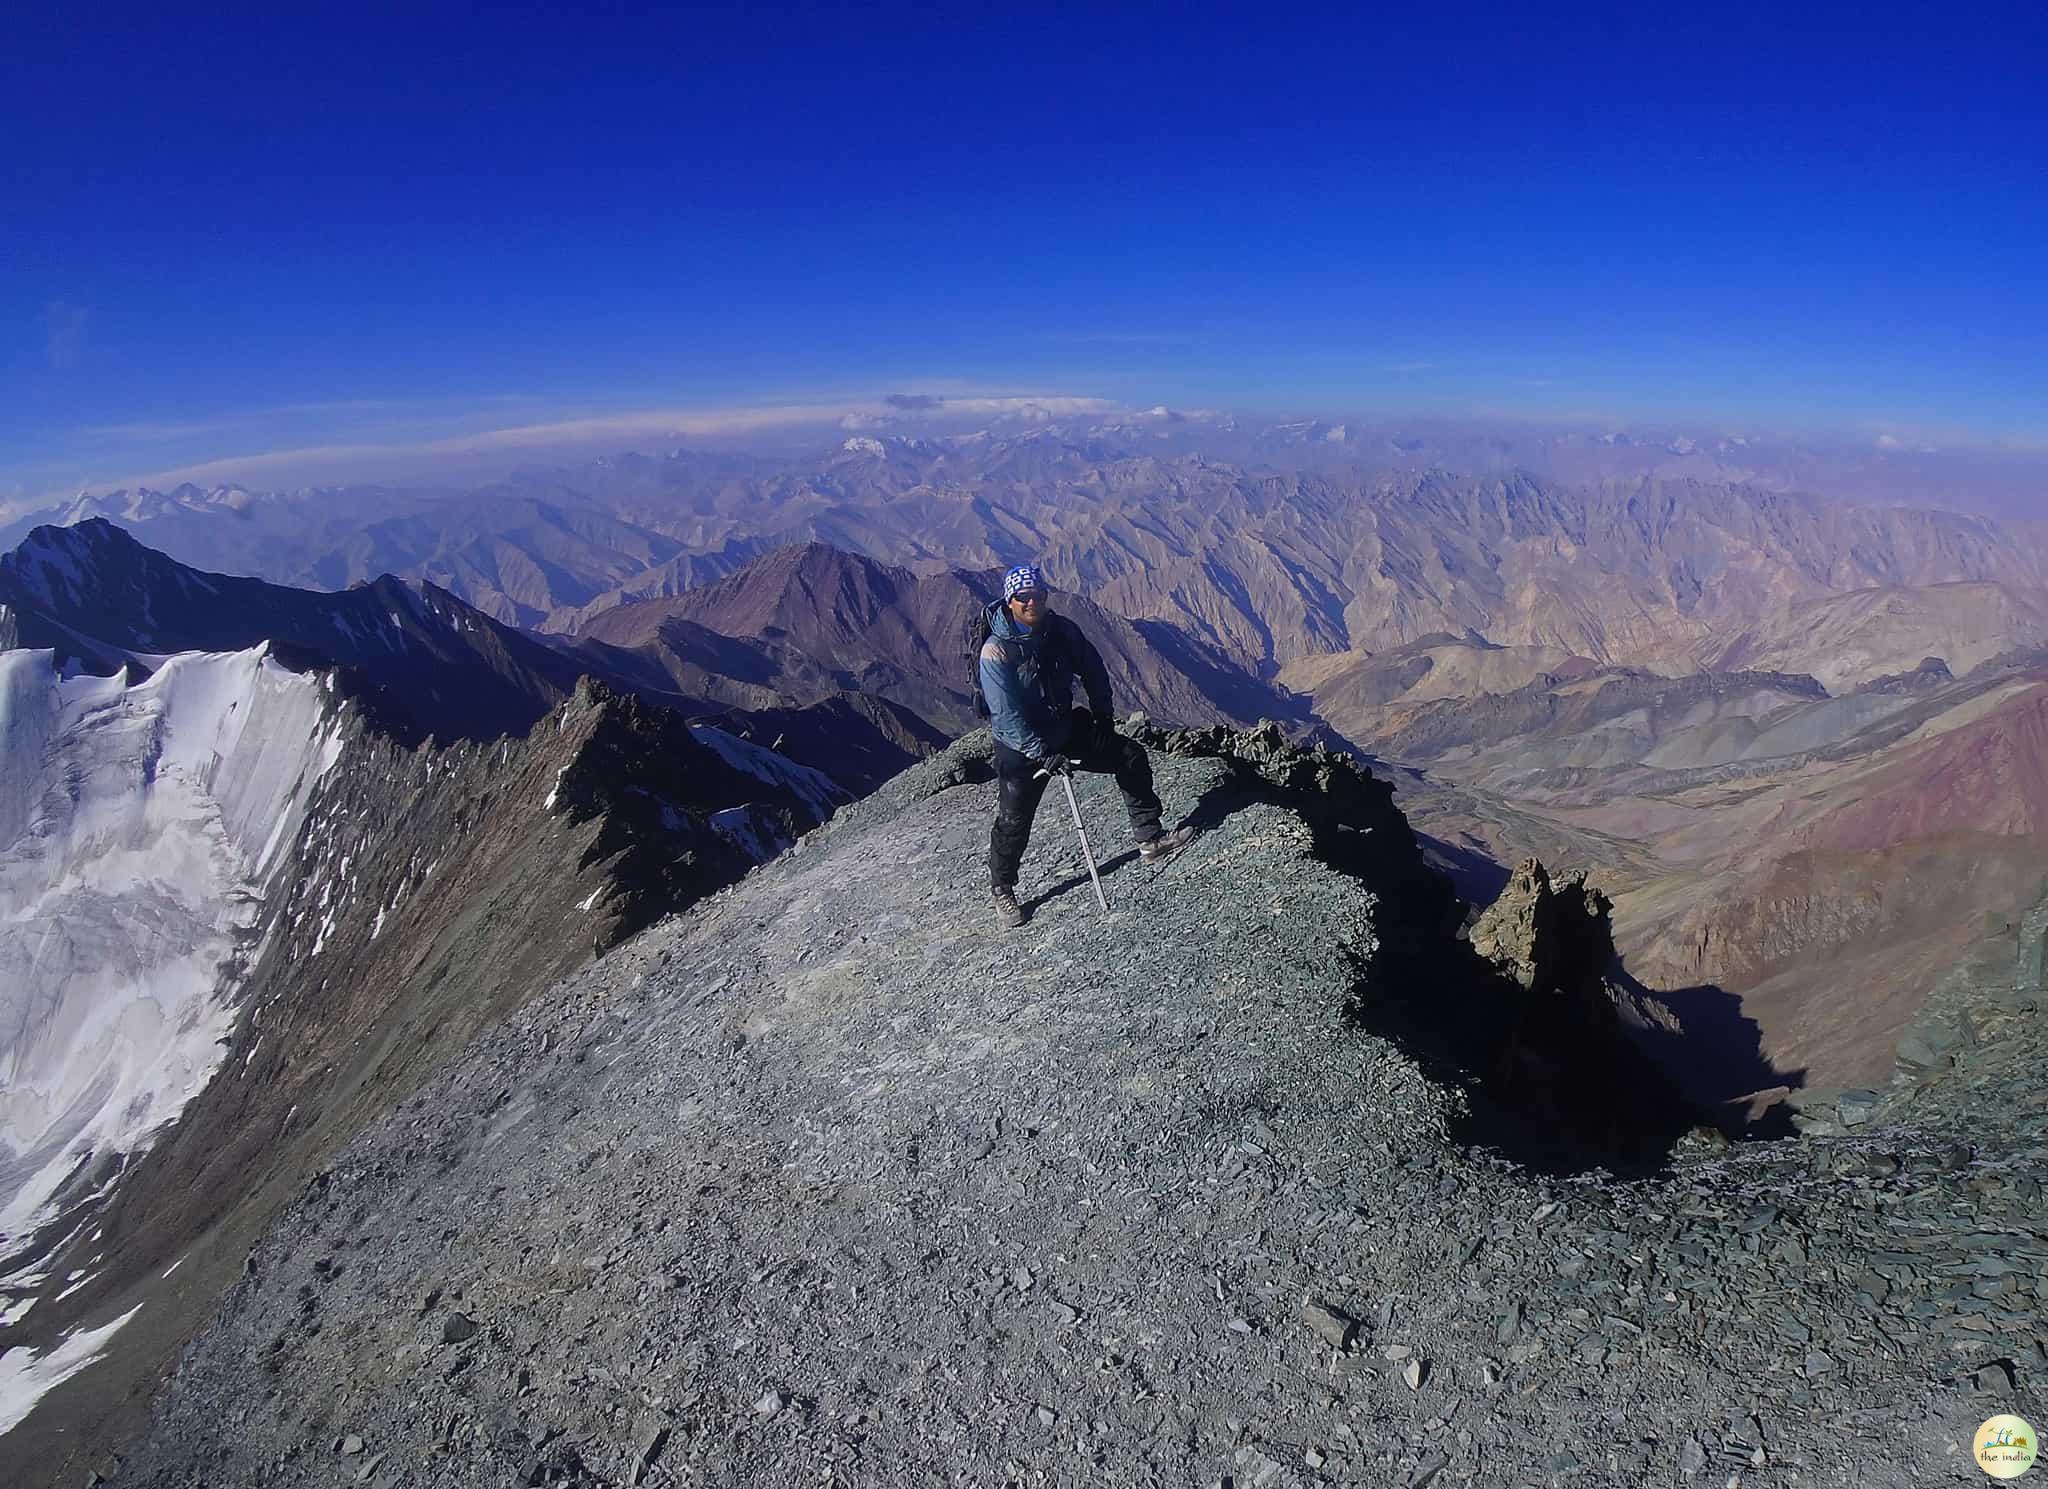 Stok Kangri Trek - An Experience That Never Forgettable